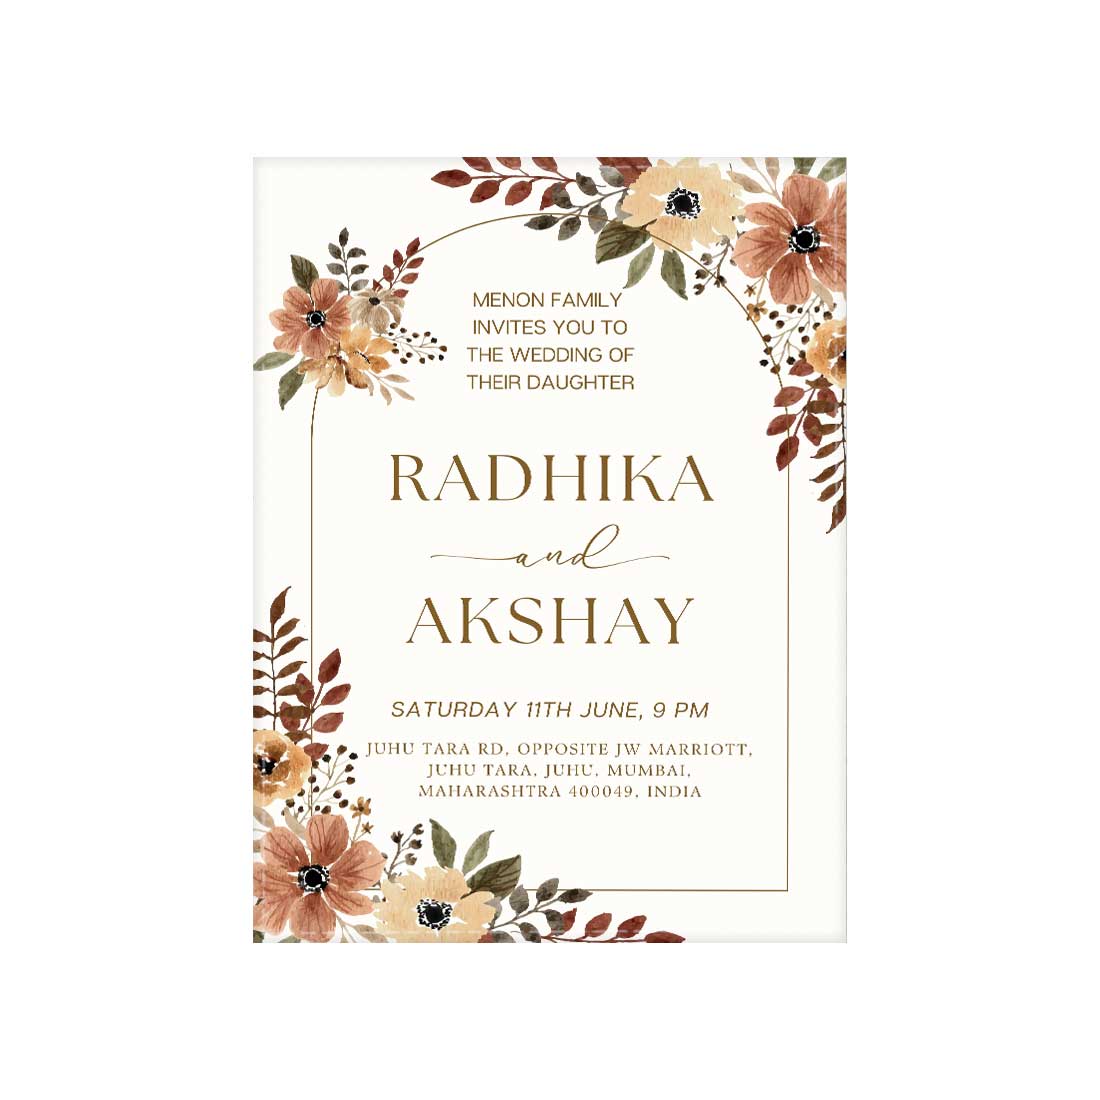 Reception Cards for Wedding - Personalized Marriage Invitation Card